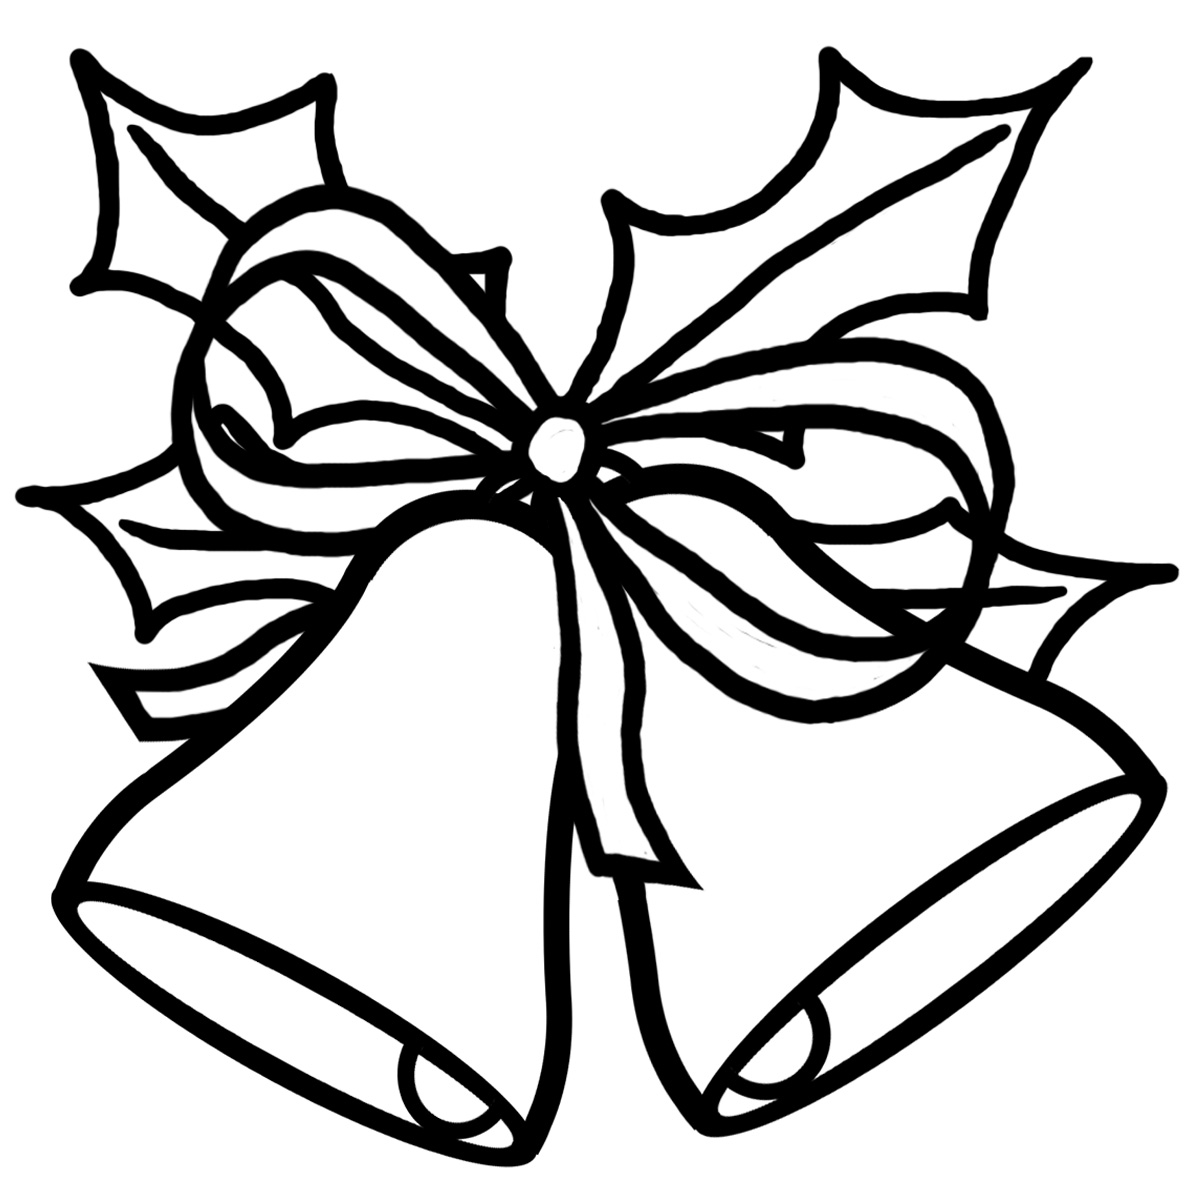 Christmas Clip Art Black And White | Funny Clip art and Holidays